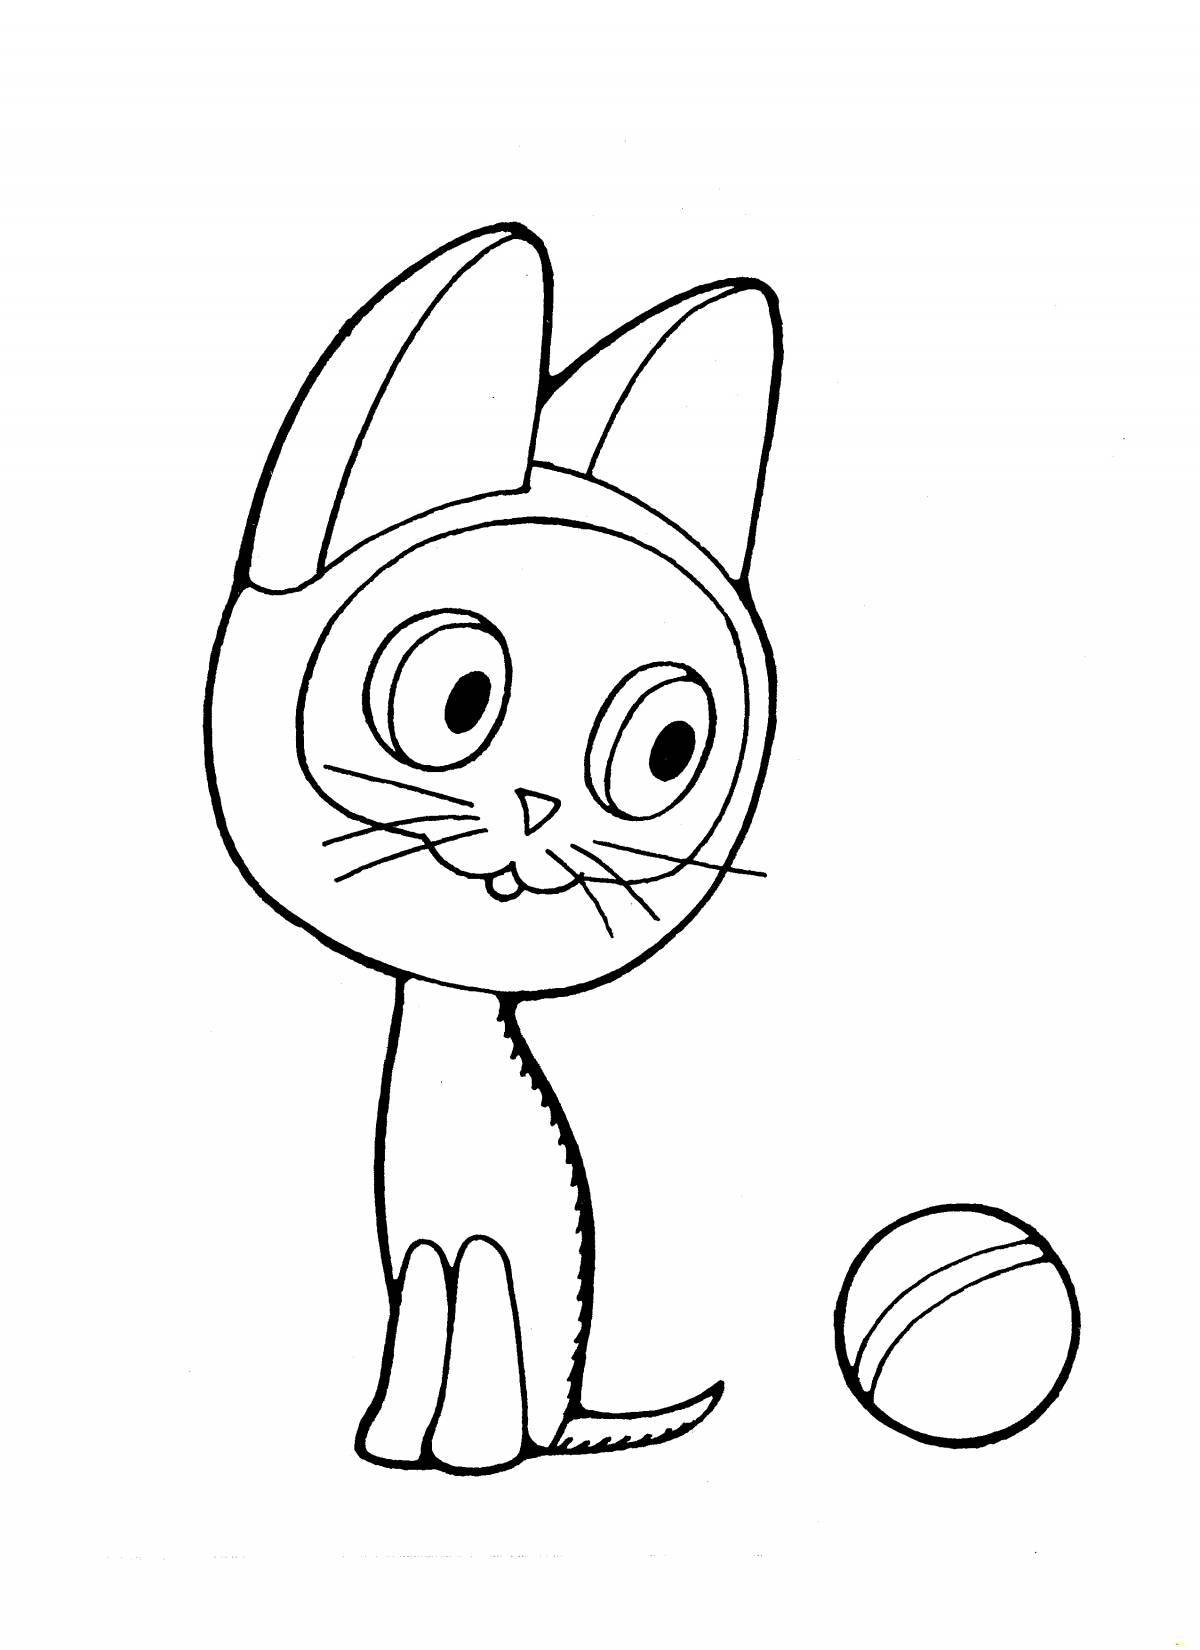 Wagging kitten coloring book